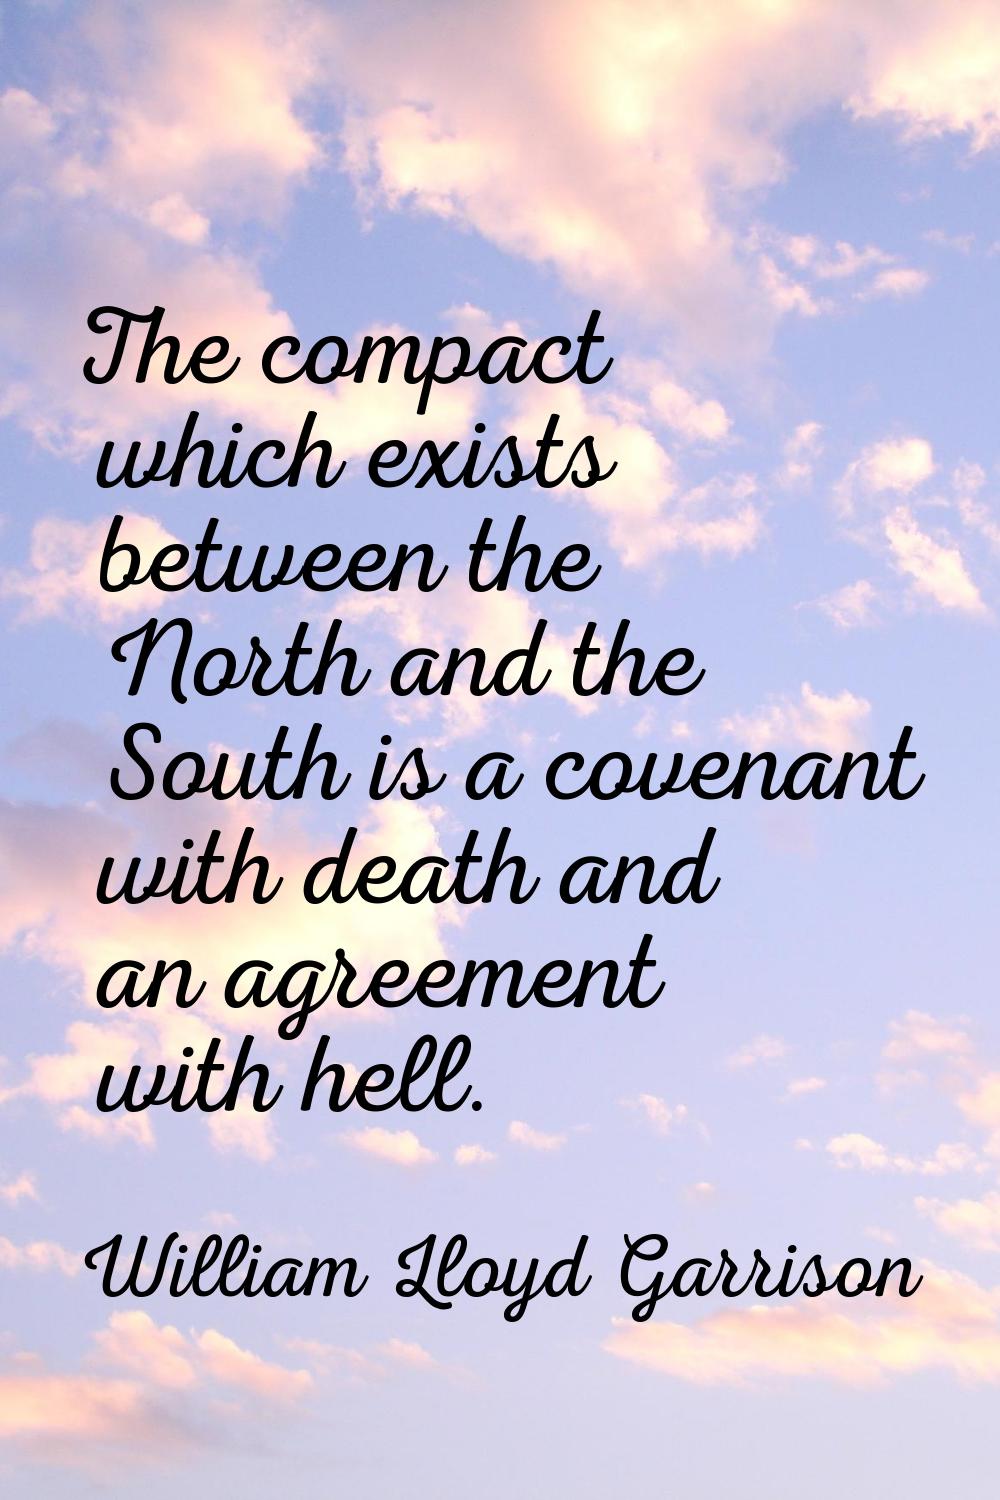 The compact which exists between the North and the South is a covenant with death and an agreement 